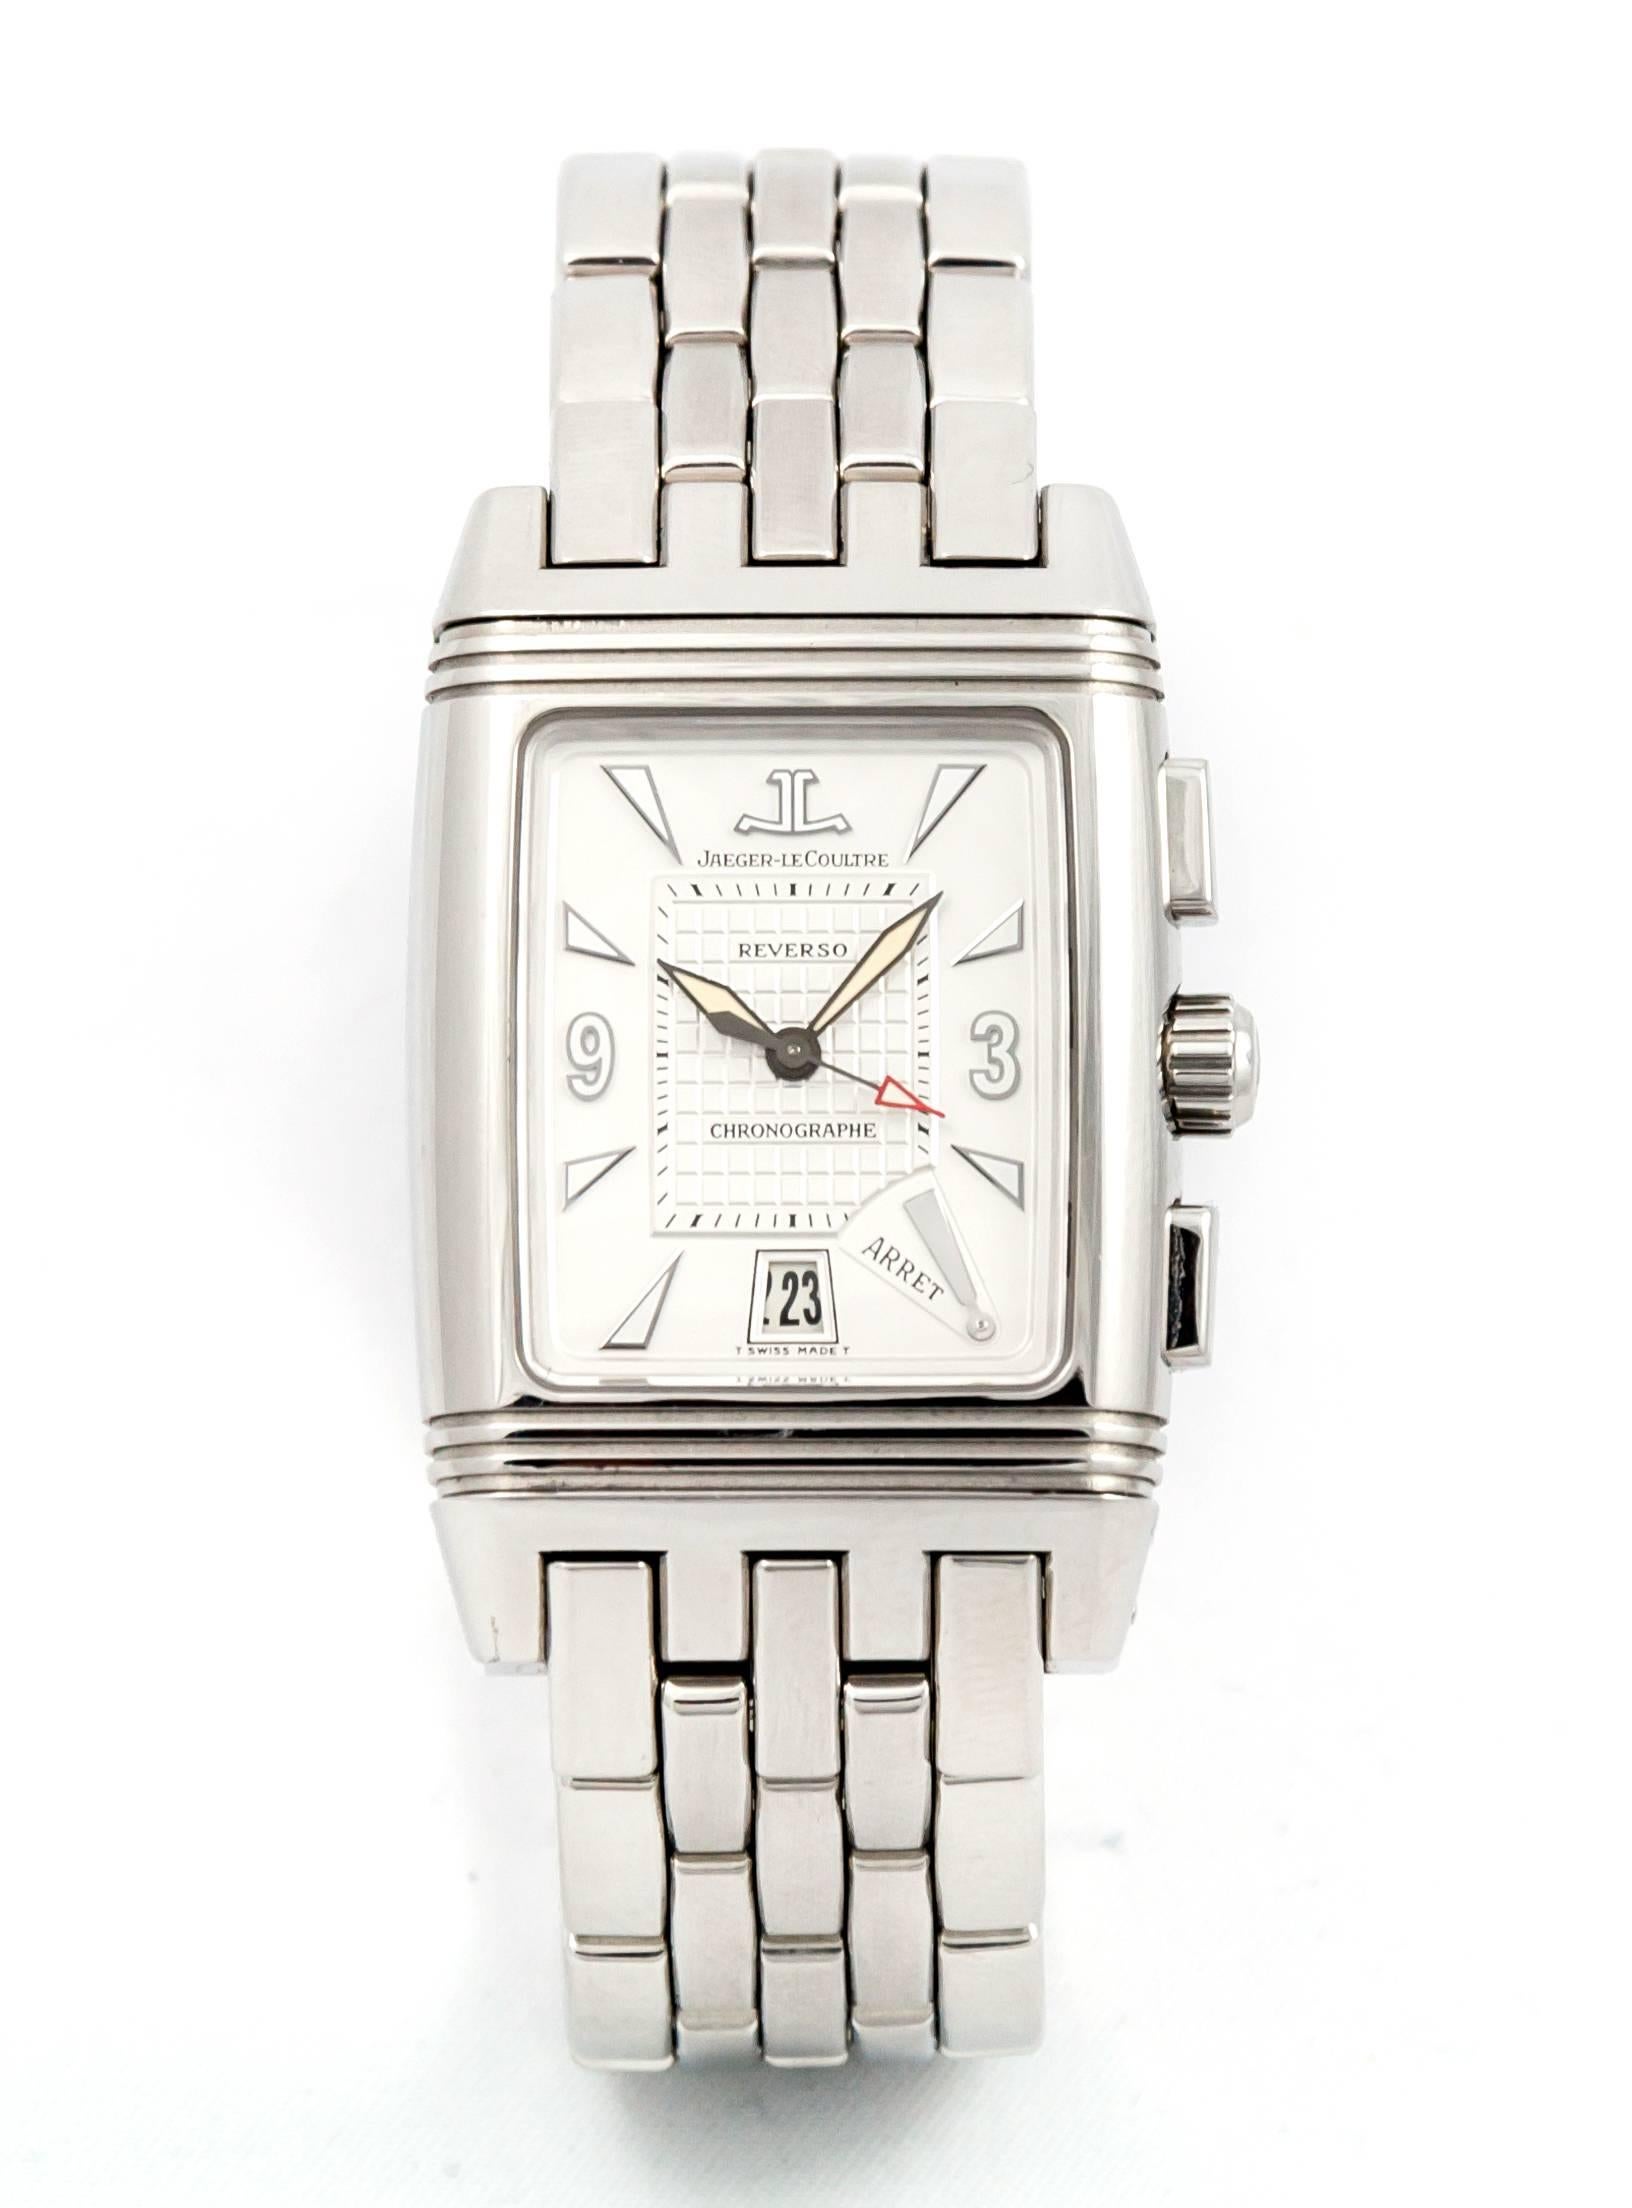 JAEGER LECOULTRE
Reverso Gran Sport chrono.
Steel / steel bracelet.
One face steel dial. Date 6H. Seconds central.
Recall time.
A chrono steel / black face.
Mechanical movement.
Warranty 1 year.